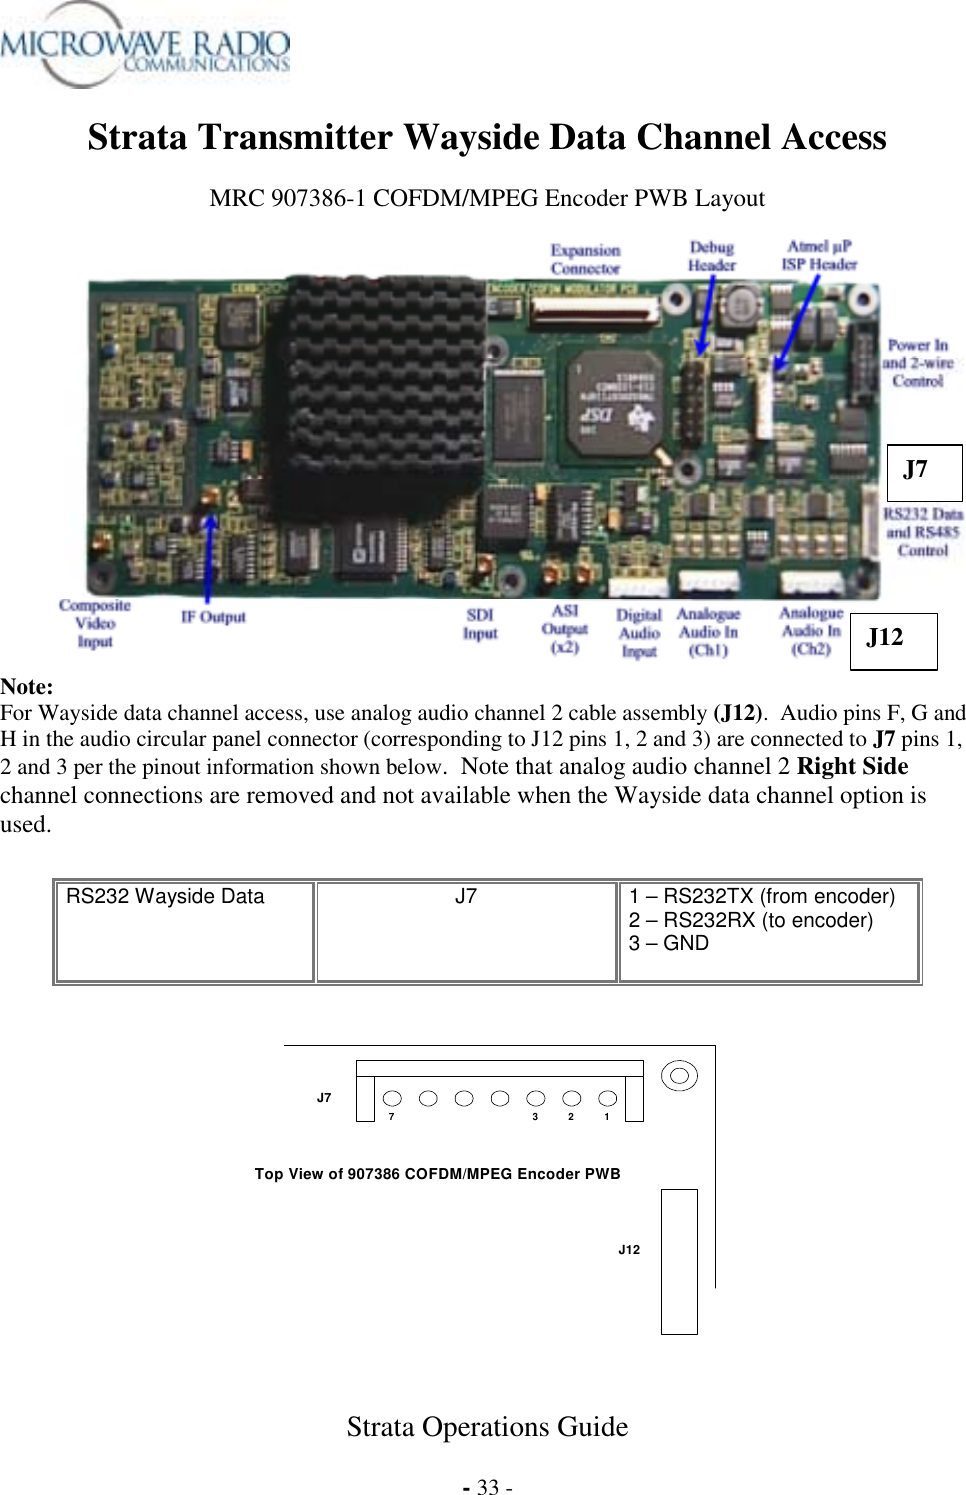  Strata Operations Guide  - 33 -  Strata Transmitter Wayside Data Channel Access  MRC 907386-1 COFDM/MPEG Encoder PWB Layout   J7 J12 Note: For Wayside data channel access, use analog audio channel 2 cable assembly (J12).  Audio pins F, G and H in the audio circular panel connector (corresponding to J12 pins 1, 2 and 3) are connected to J7 pins 1, 2 and 3 per the pinout information shown below.  Note that analog audio channel 2 Right Side channel connections are removed and not available when the Wayside data channel option is used.     Top View of 907386 COFDM/MPEG Encoder PWB J7 J12 7 12 3  RS232 Wayside Data   J7  1 – RS232TX (from encoder) 2 – RS232RX (to encoder) 3 – GND  